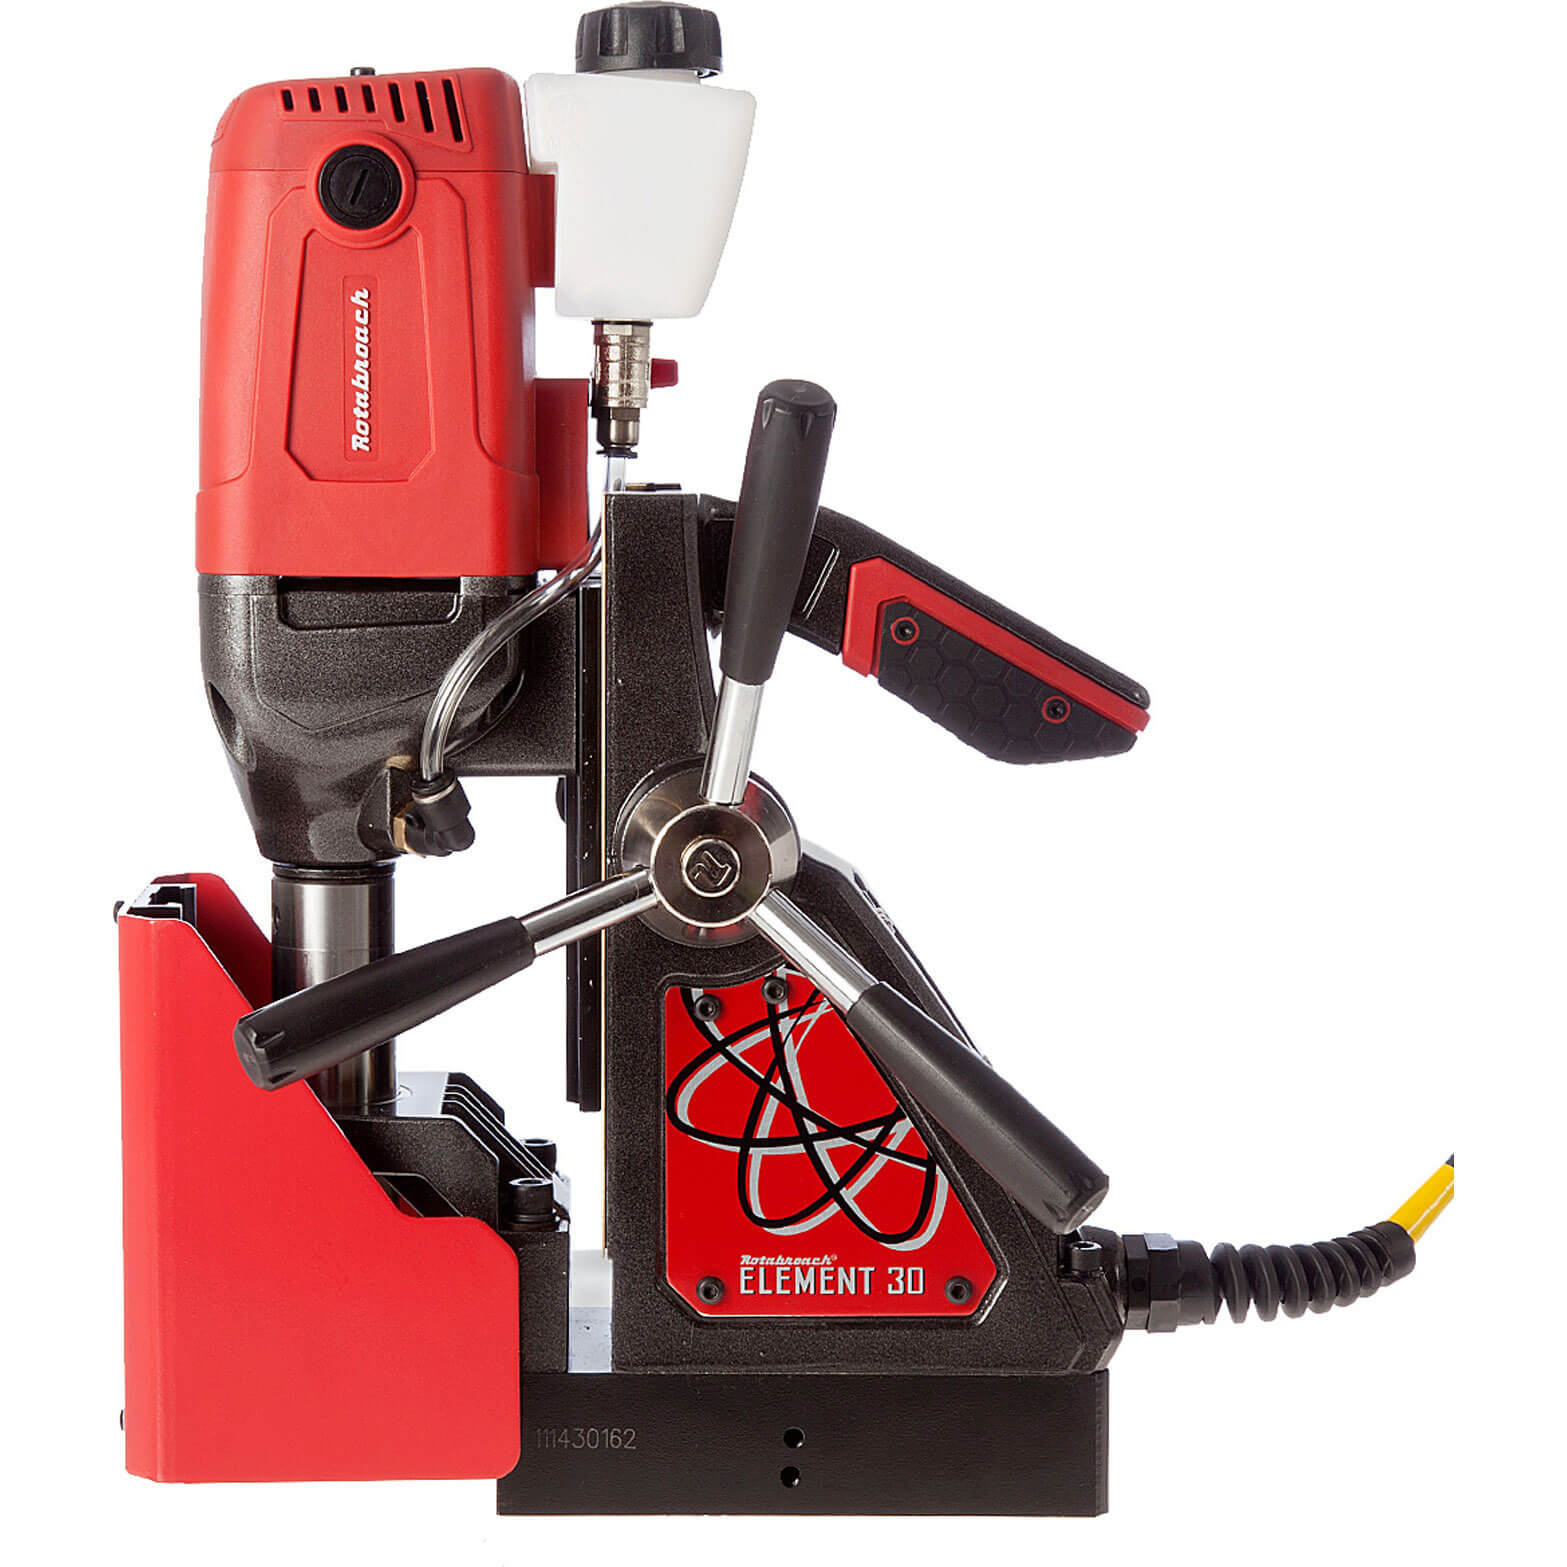 Image of Rotabroach Element 30 Magnetic Drilling Machine 240v